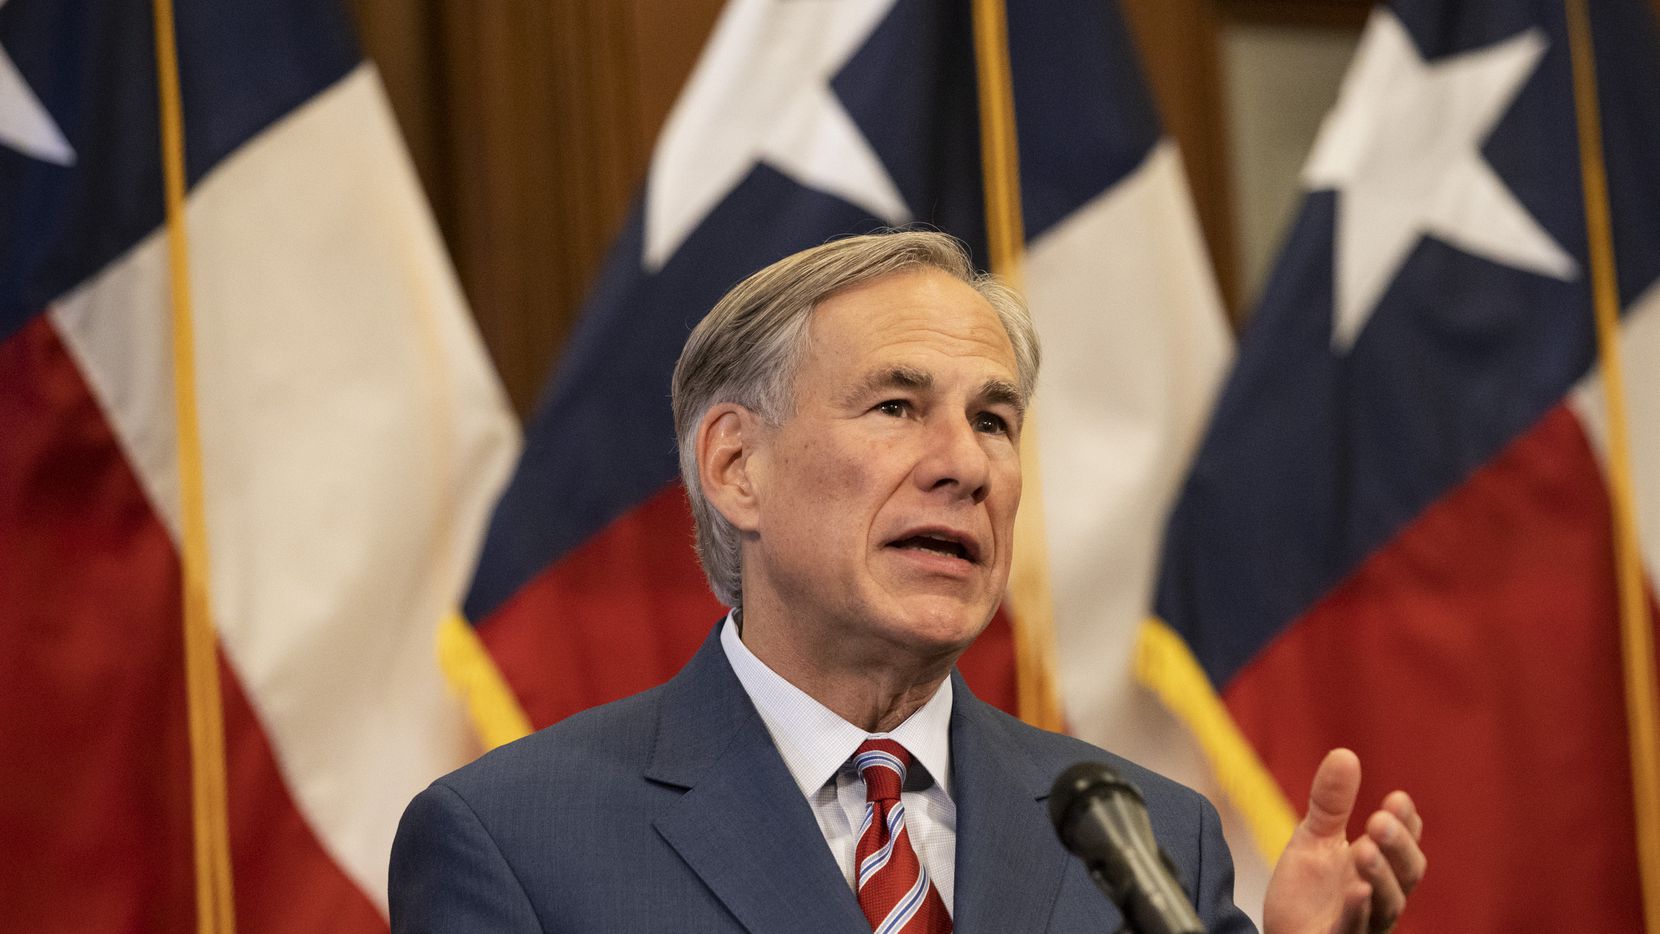 Texas Governor Greg Abbott announces the reopening of more Texas businesses during the COVID-19 pandemic at a press conference at the Texas State Capitol in Austin on Monday, May 18, 2020. Abbott said that childcare facilities, youth camps, some professional sports, and bars may now begin to fully or partially reopen their facilities as outlined by regulations listed on the Open Texas website.